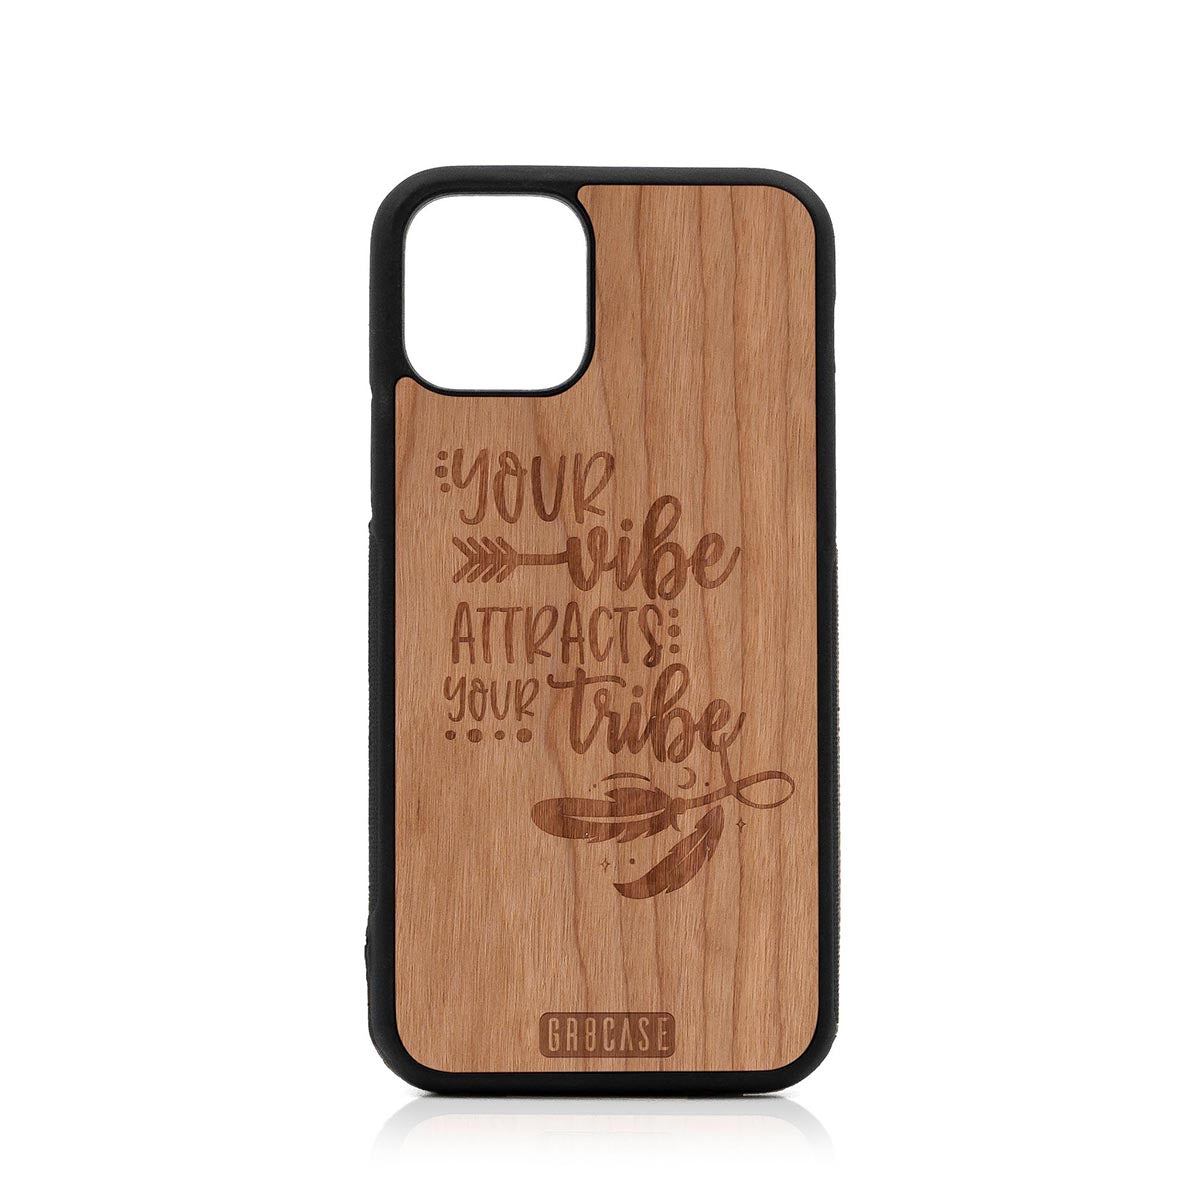 Your Vibe Attracts Your Tribe Design Wood Case For iPhone 11 Pro